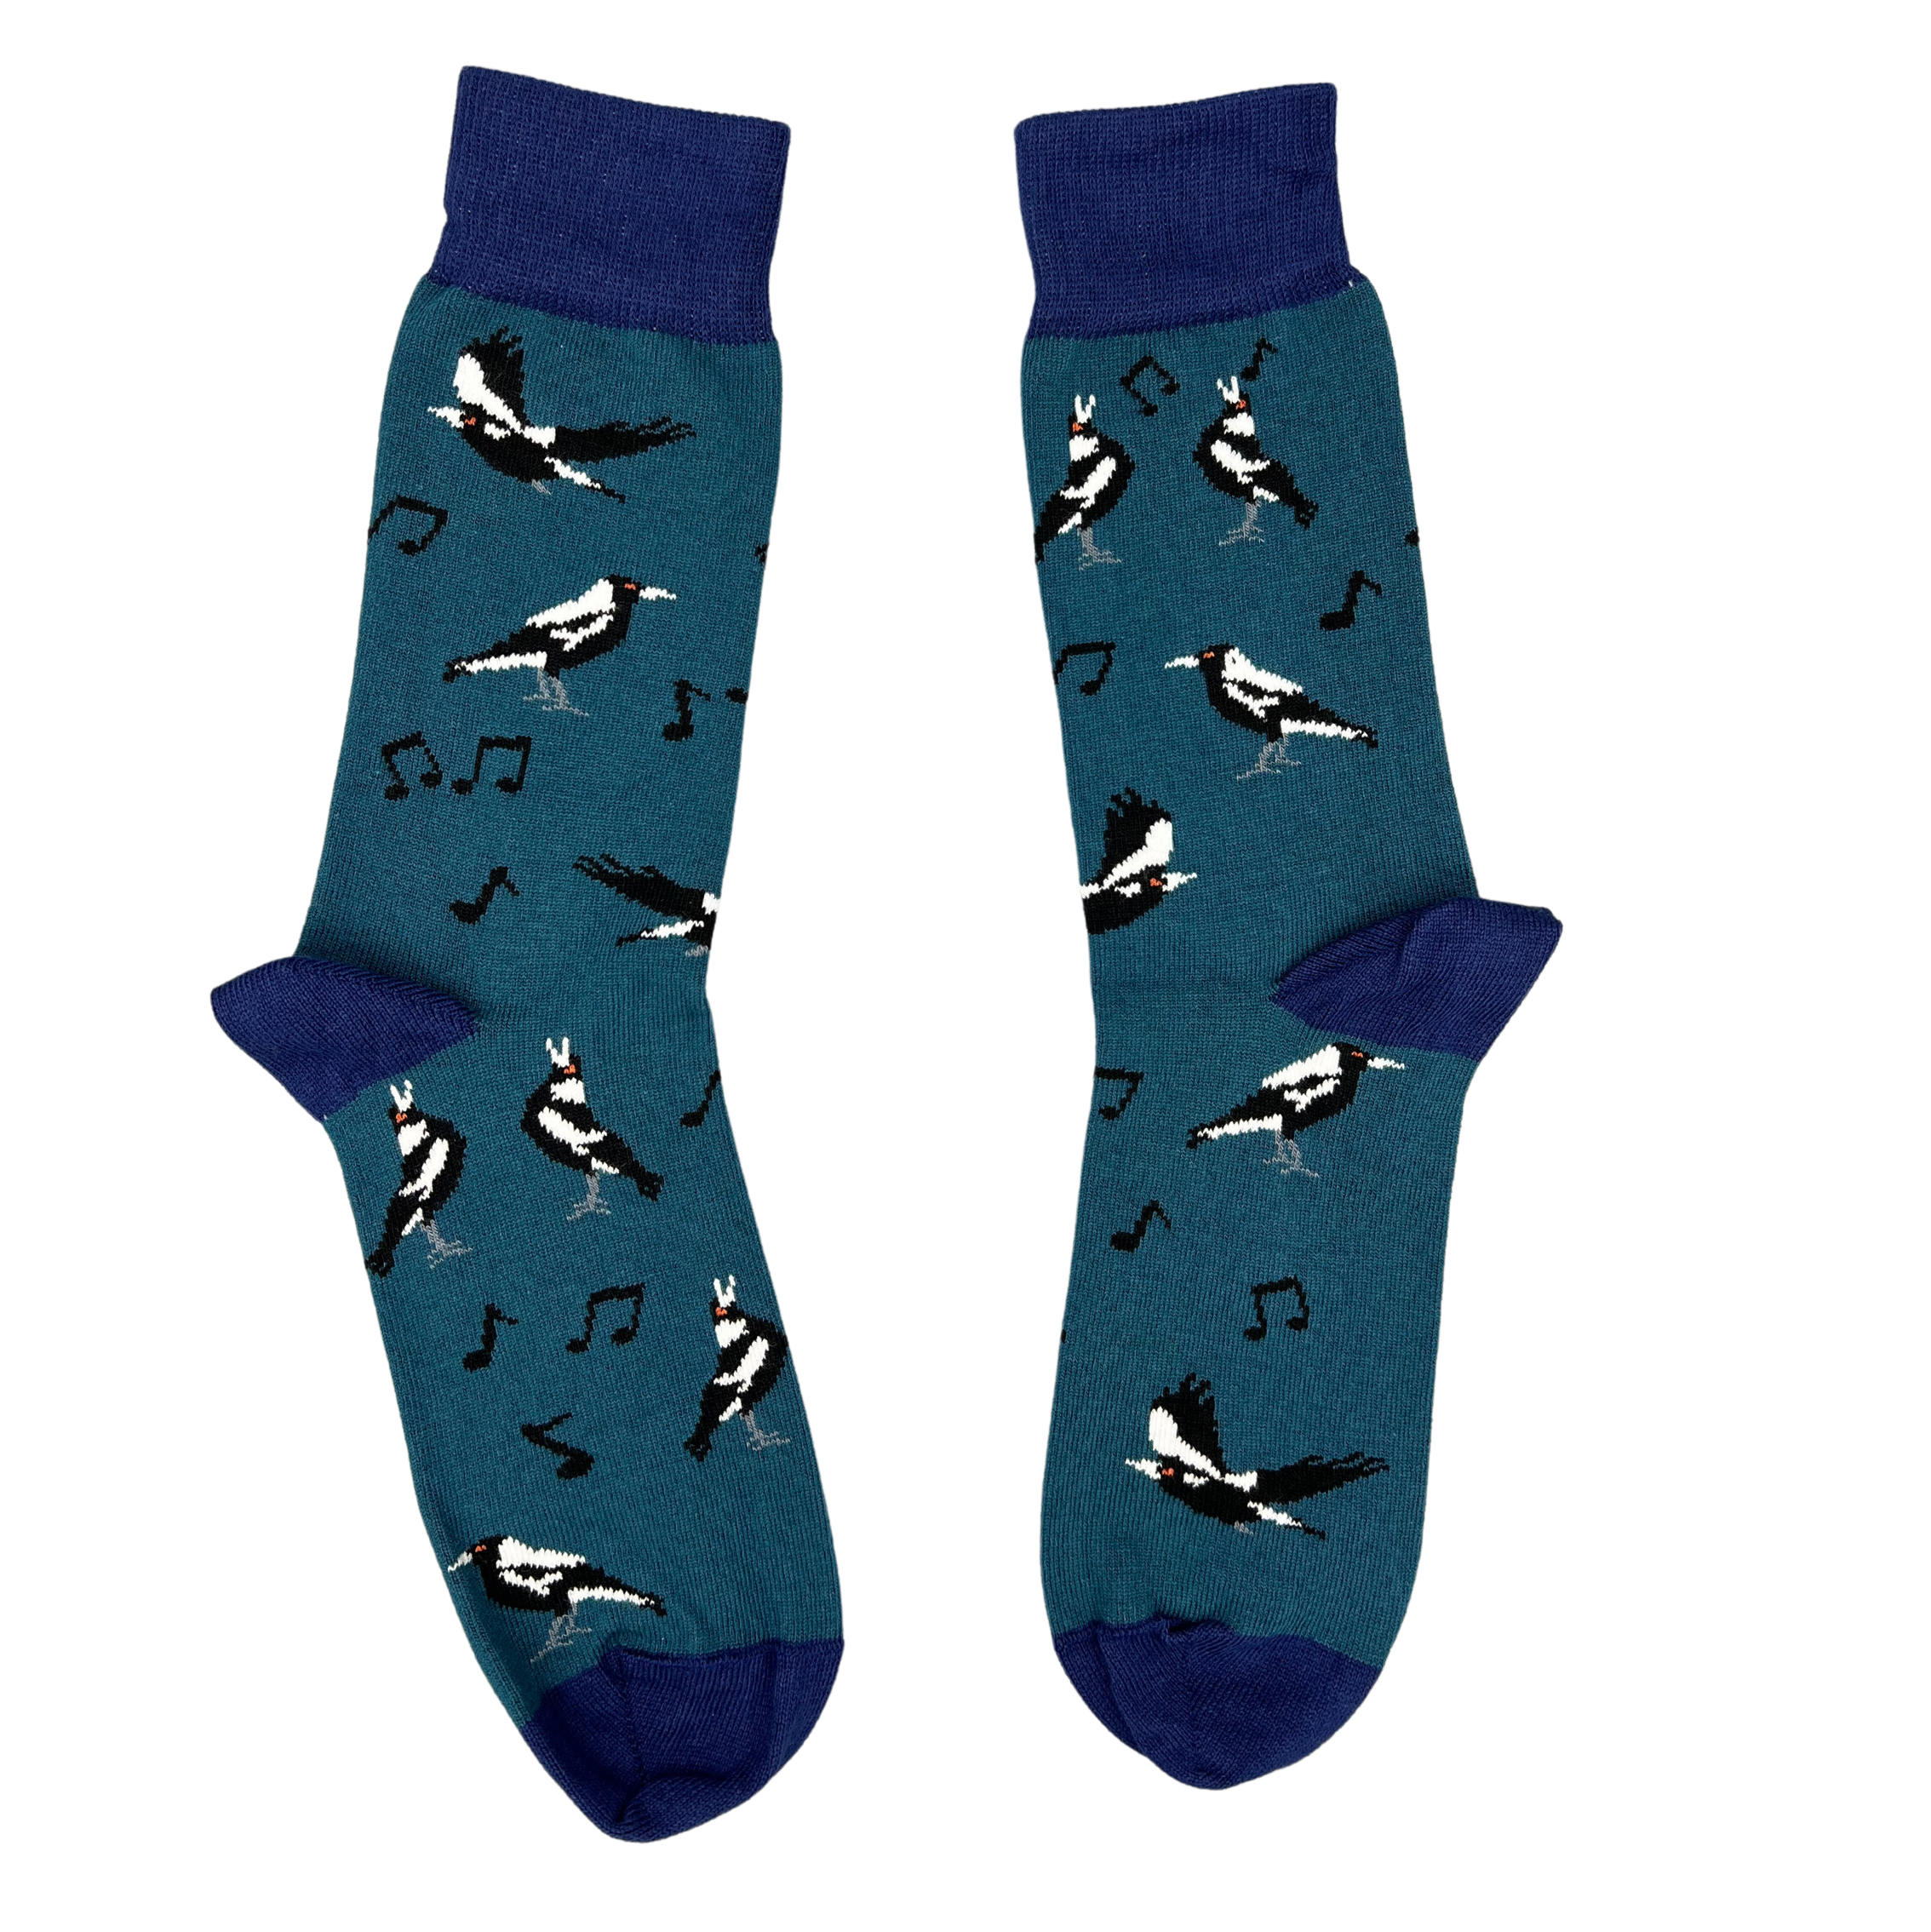 Magpie Music sock  - Aussie Made - The Sockery